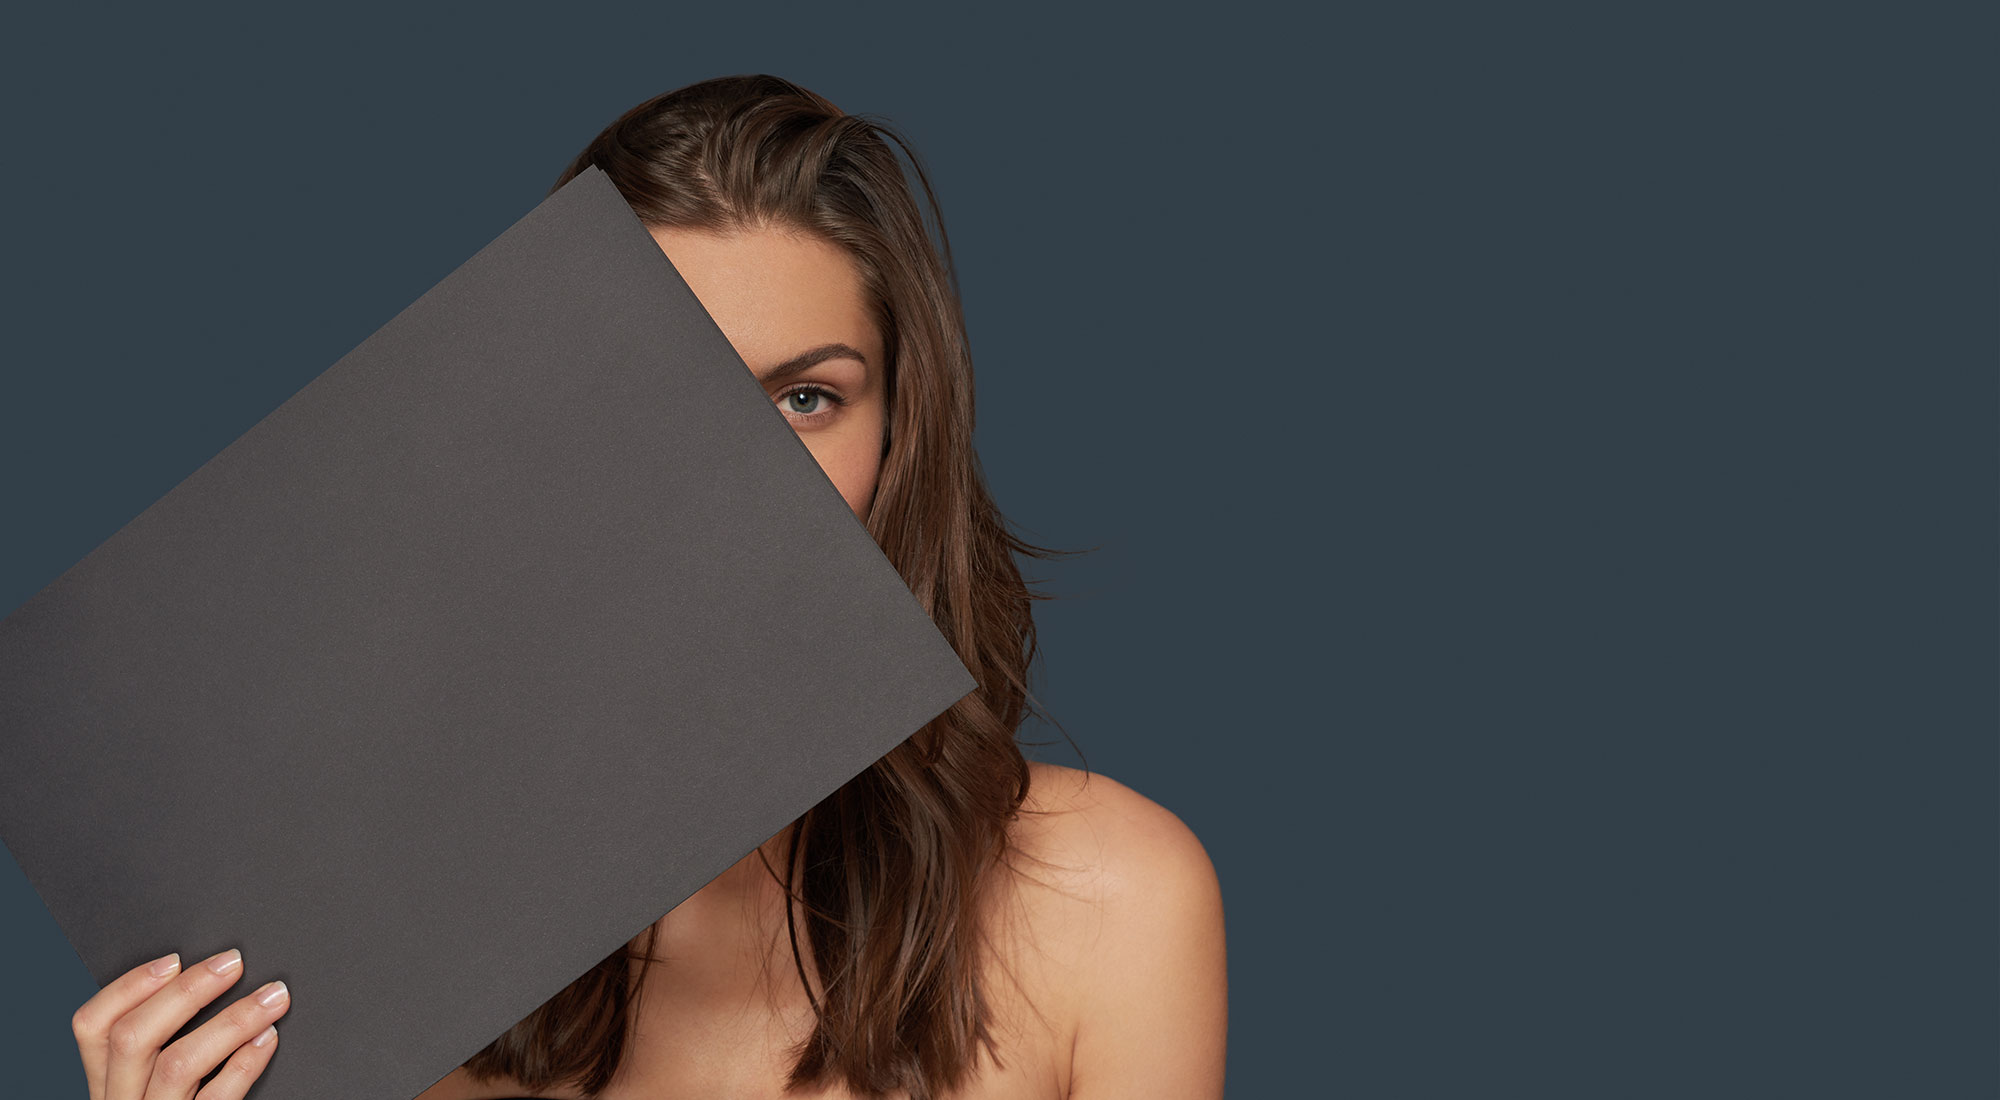 amiea model holding a grey piece of paper on a dark grey background